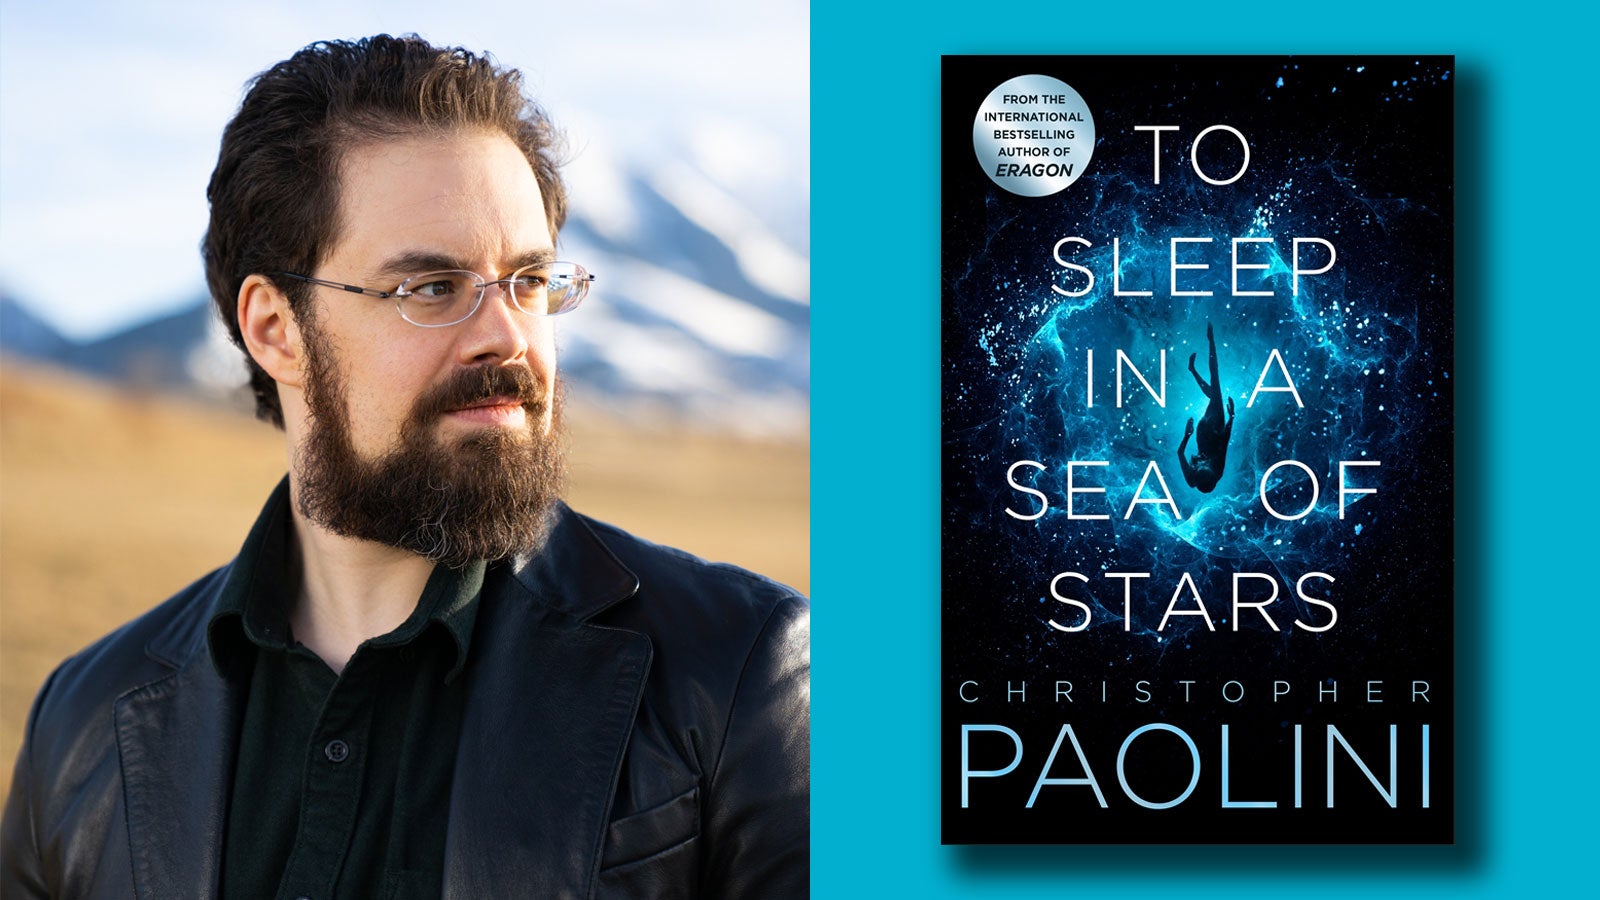 Christopher Paolini and the book cover of To Sleep in a Sea of Stars